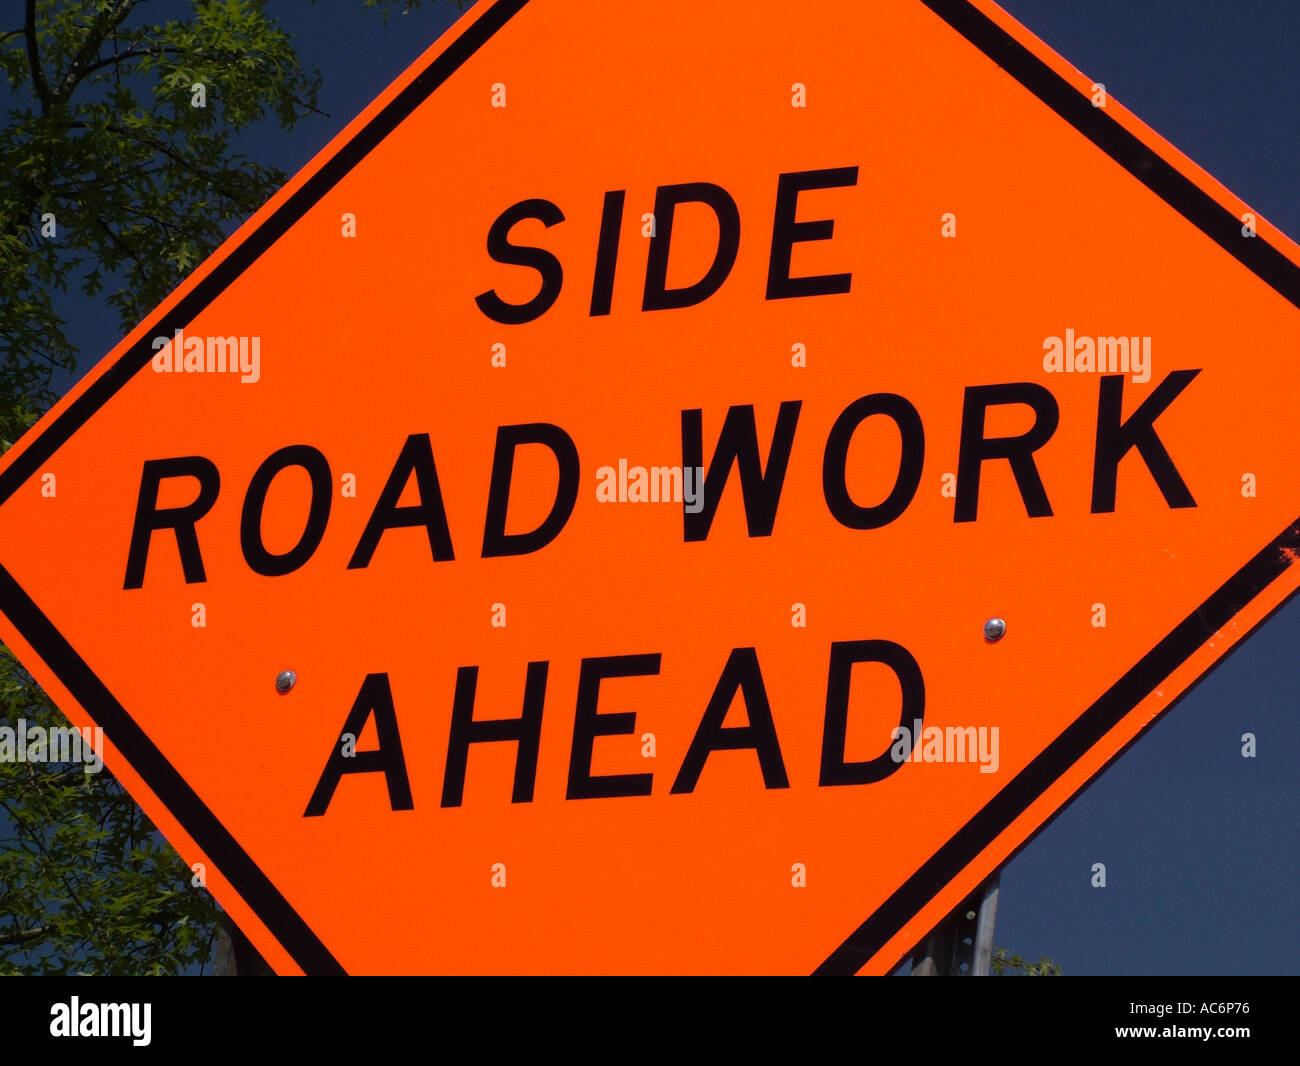 AJD42890, road sign, Side Road Work Ahead Stock Photo